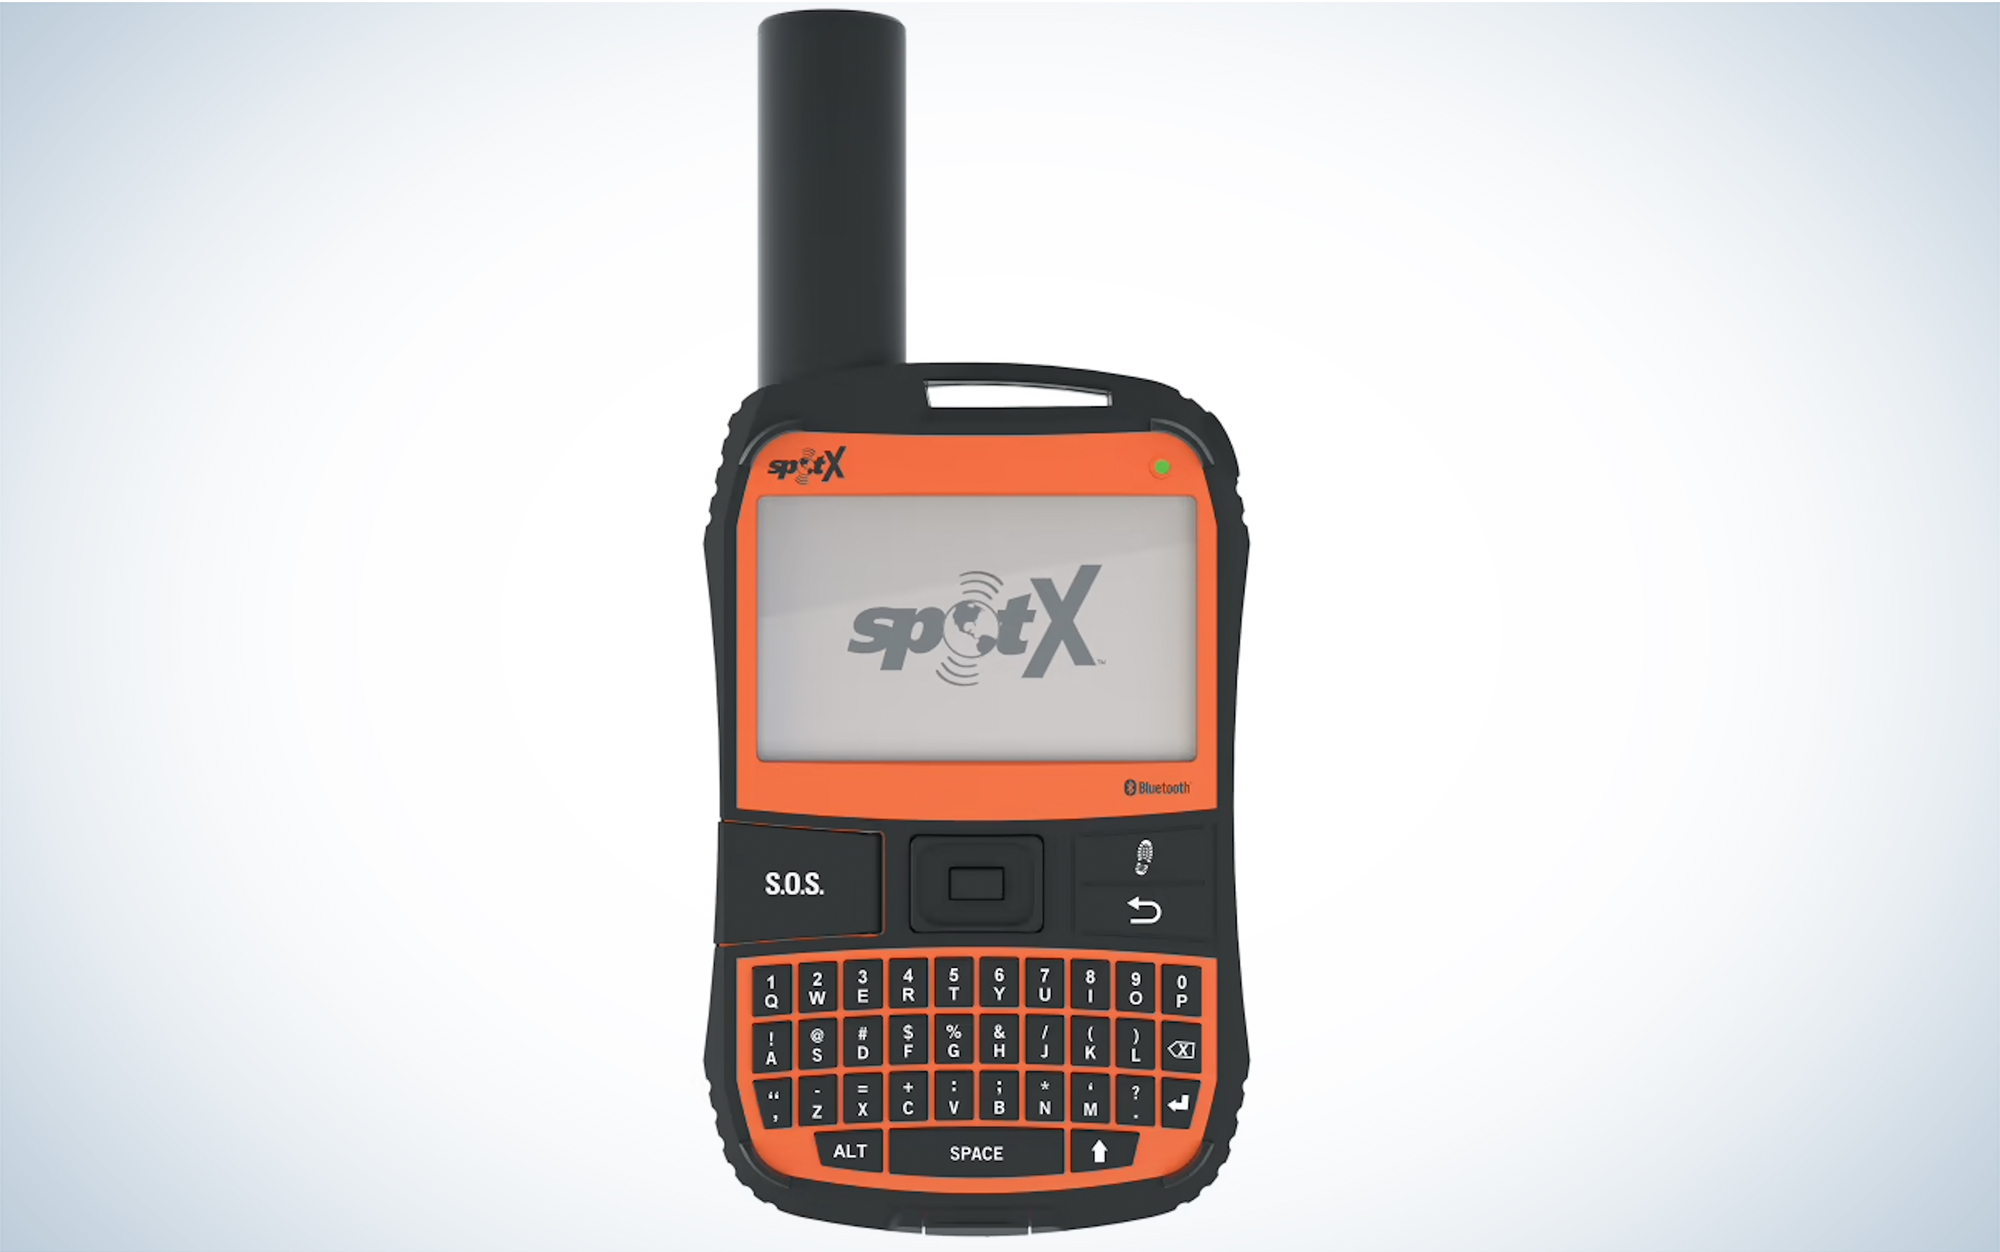 The SPOT Gen4 is one of the best satellite messengers.